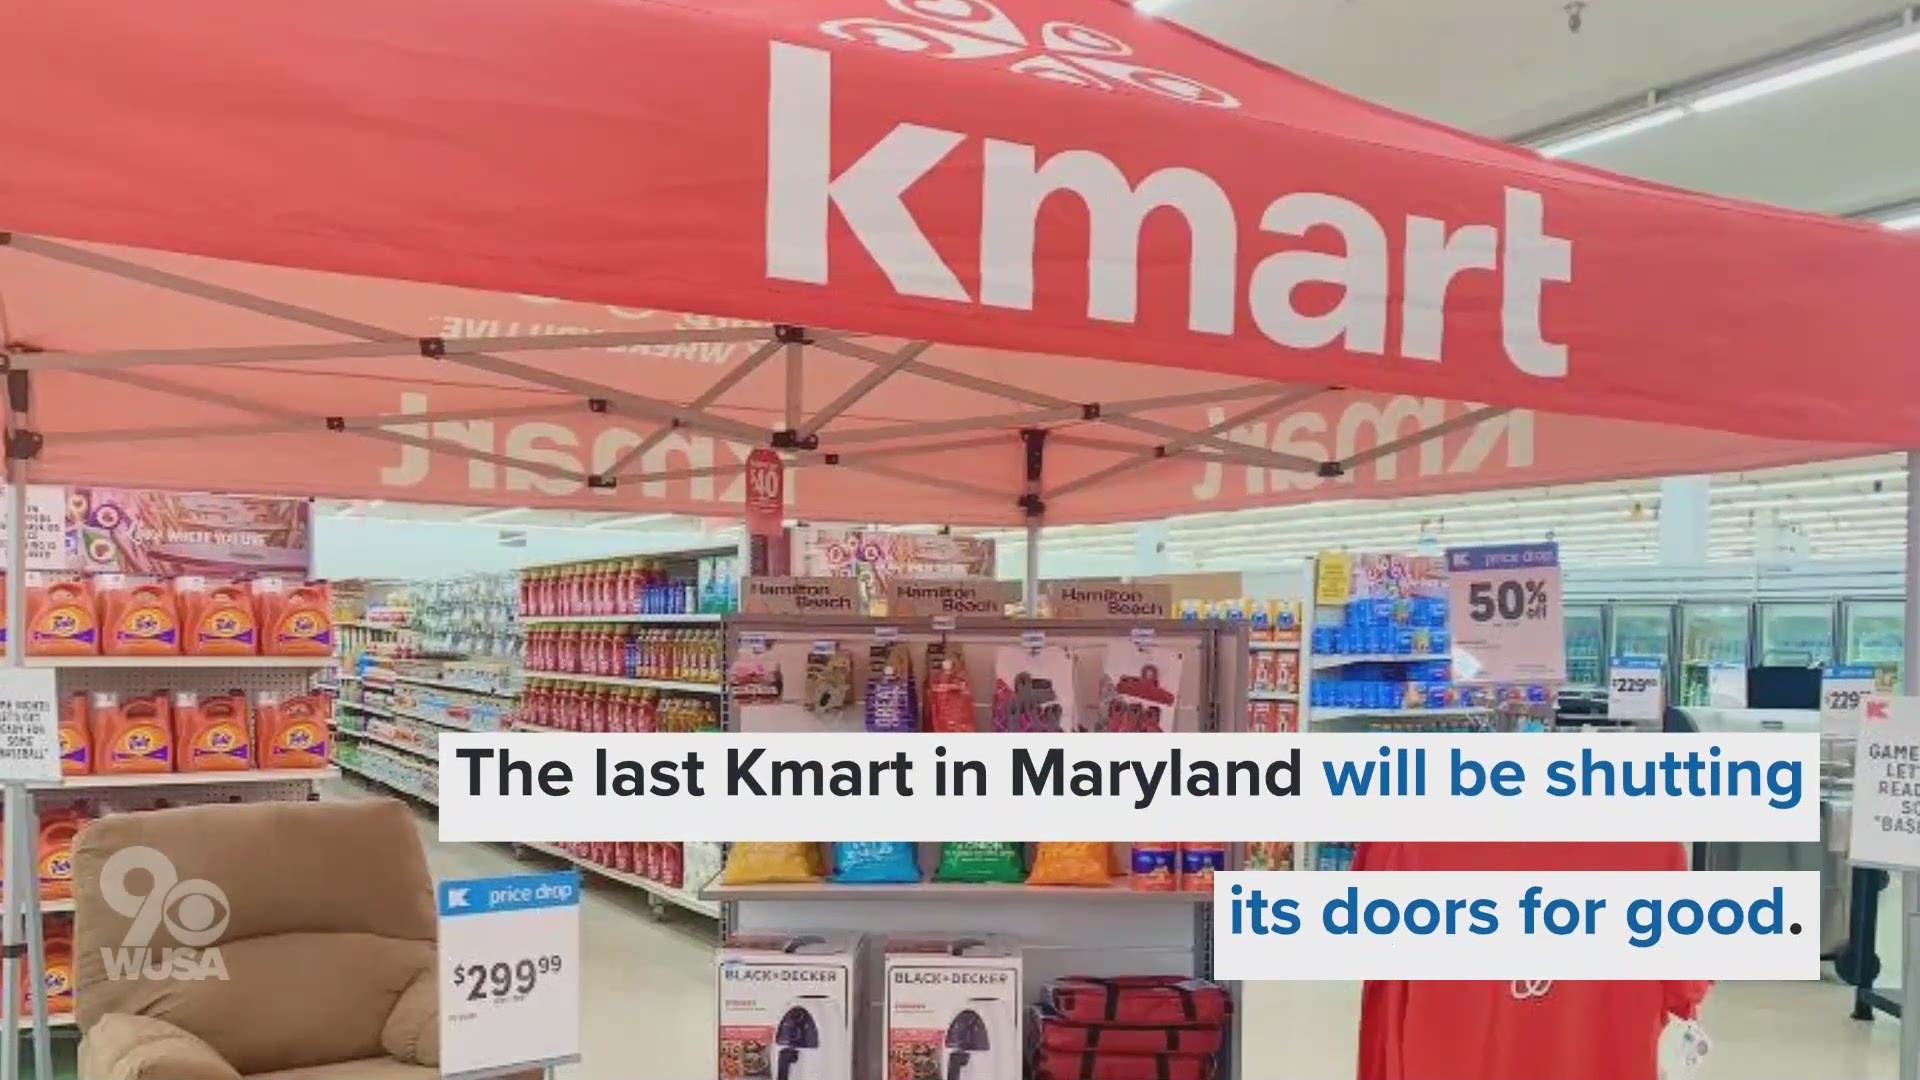 Since May 2019, the company that owns Sears and Kmart, has been closing stores, citing “a difficult retail environment and other challenges”